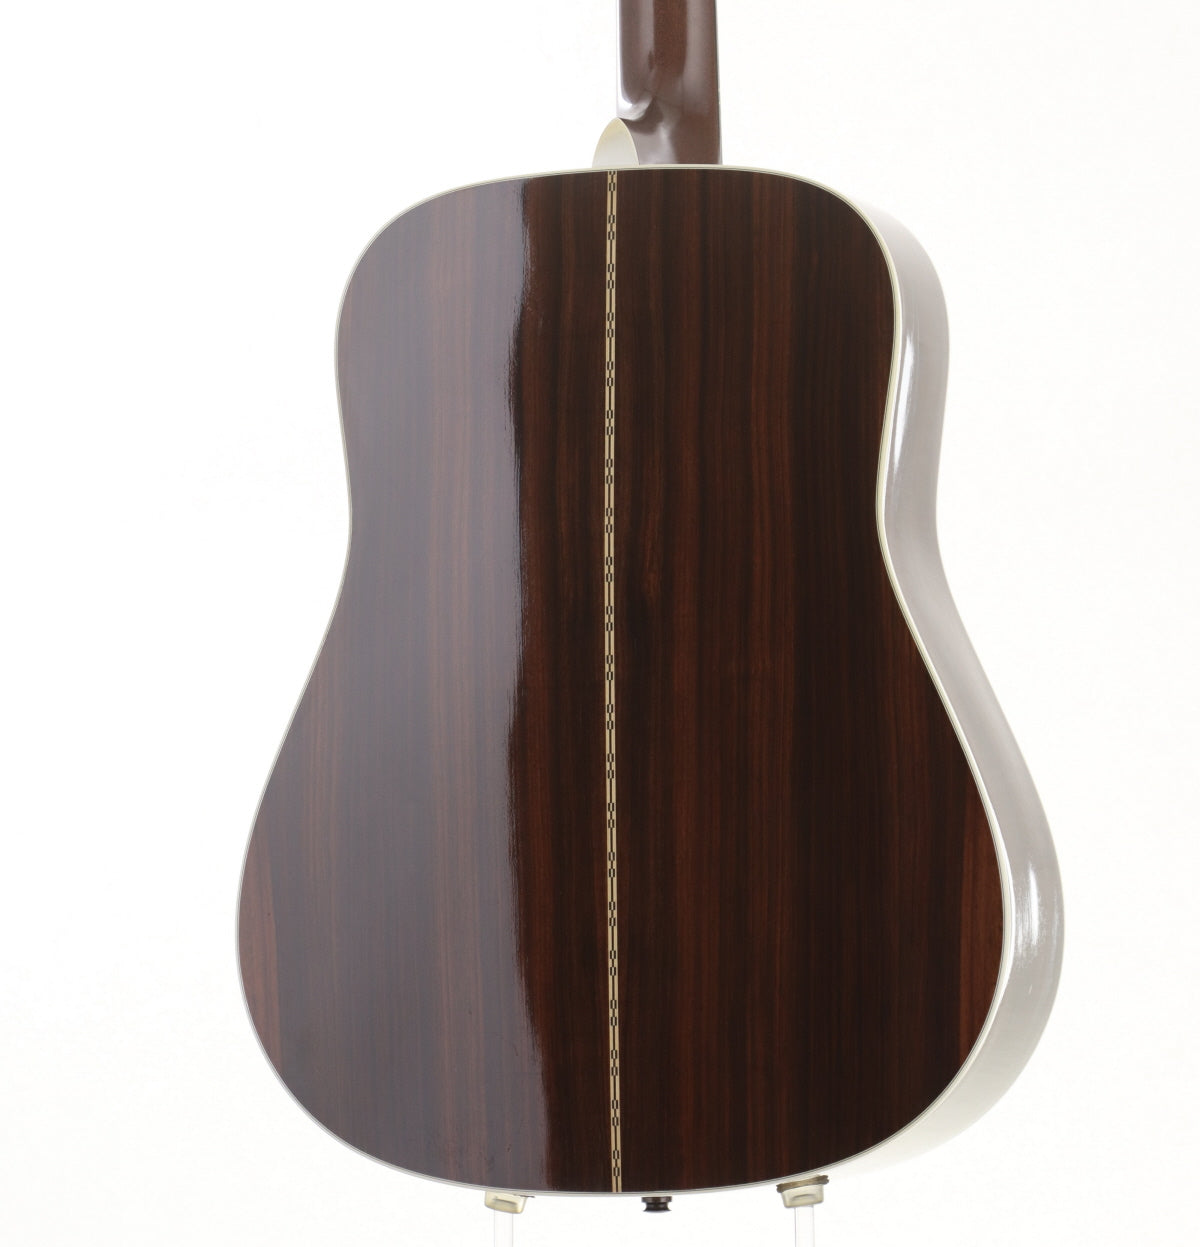 [SN 1475236] USED Martin / D-28 made in 2011 [03]